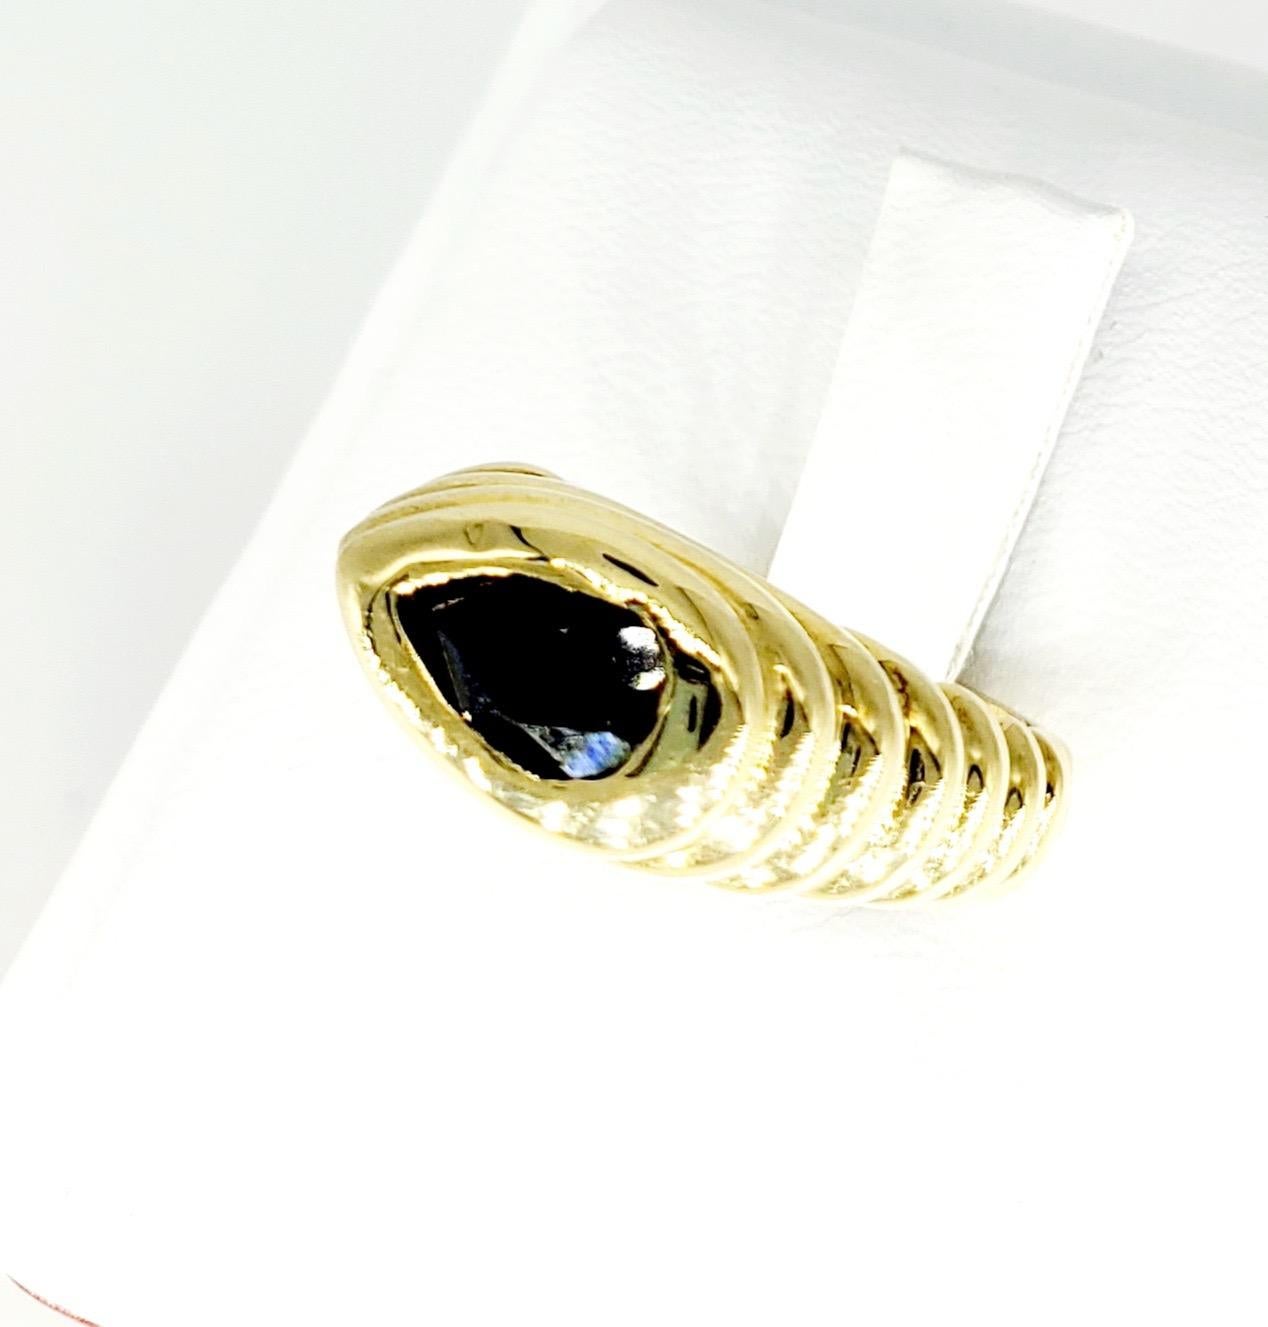 Vintage 0.50 Carat Dark Blue Pear Shape Sapphire 3D Bold design Ring. The ring weights 12.5 grams solid yellow gold 18k and is a size 6. The ring is very elegant, bold in design and heavy. Will surely stand out in the crowd.